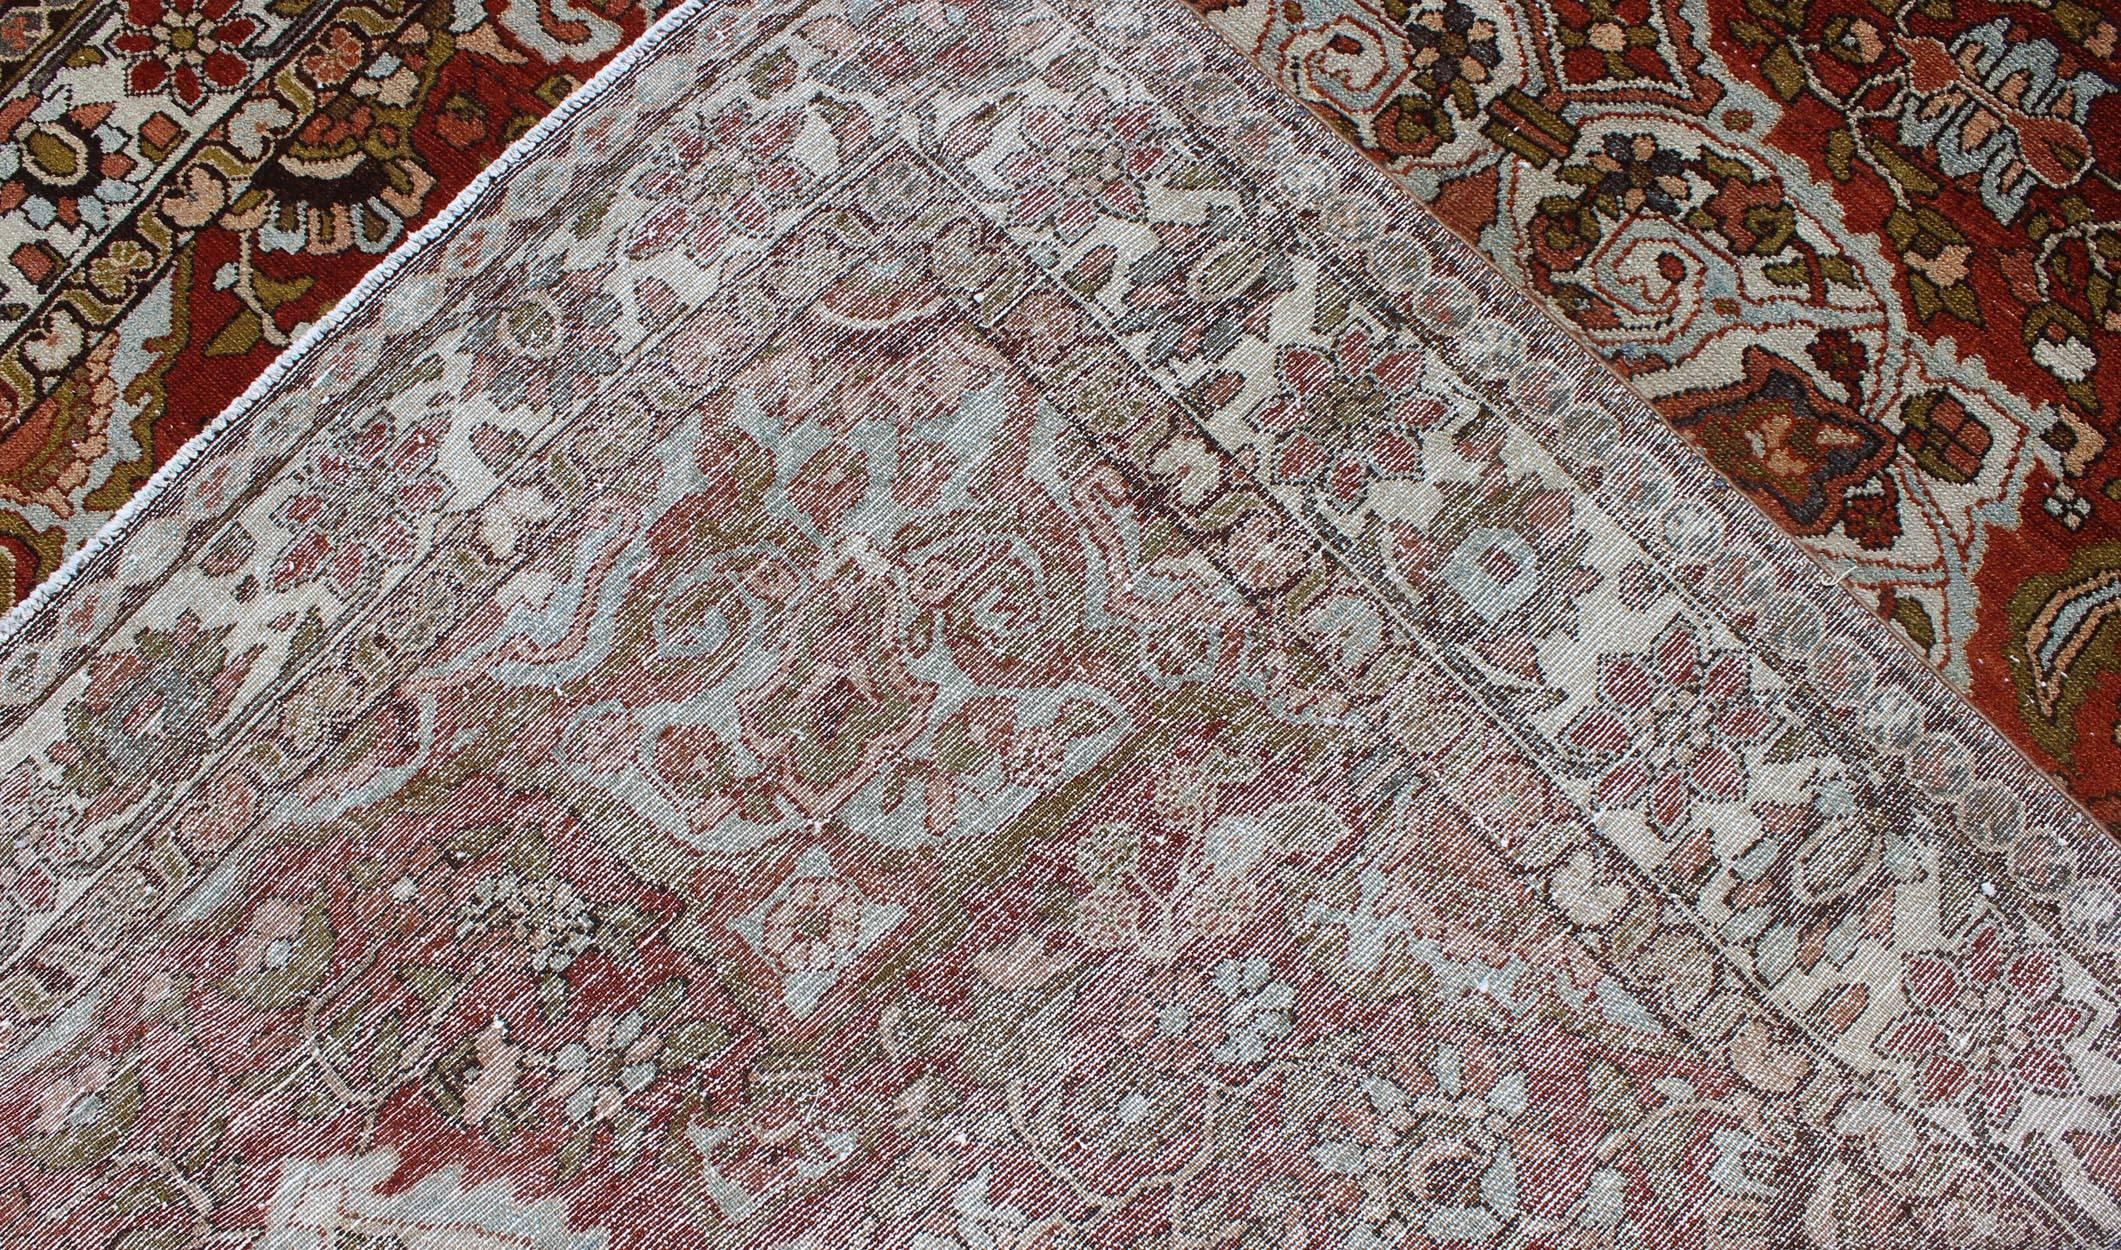 Early 20th Century Antique Persian Bakhtiari Rug With Classic Ornate Central Medallion Design For Sale